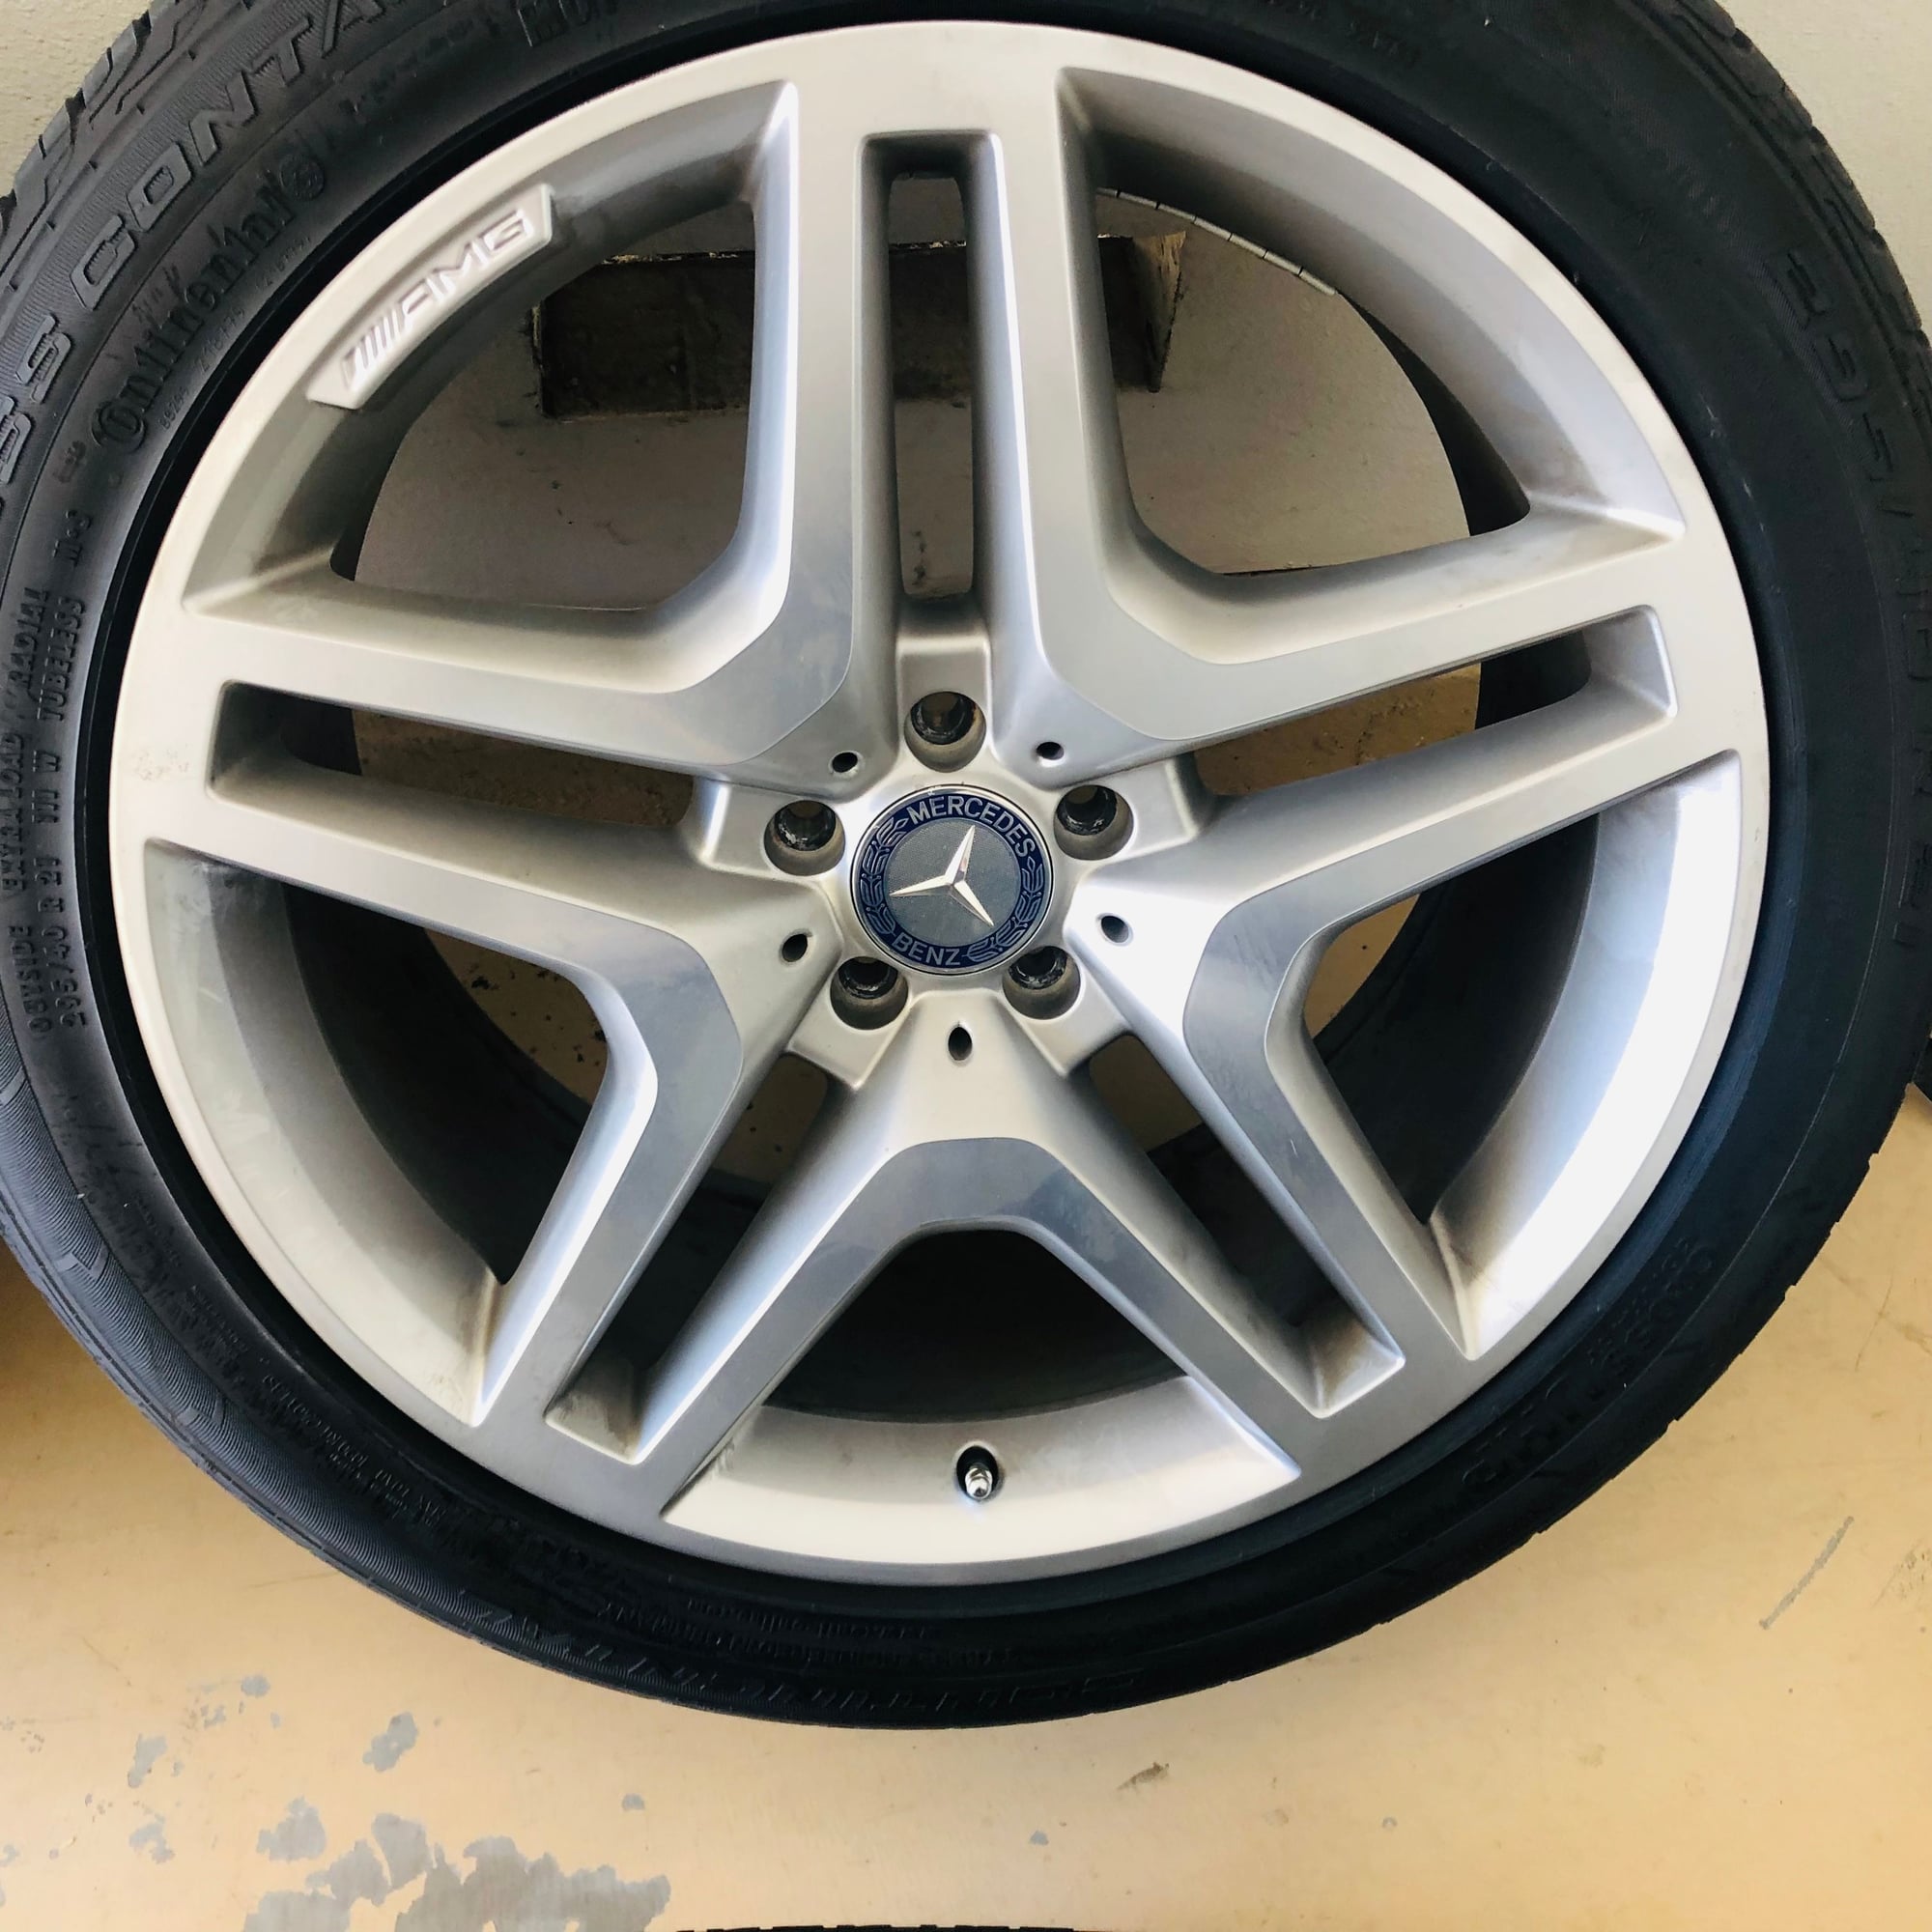 Wheels and Tires/Axles - 21"  GL 550 AMG WHEELS AND TIRES PERFECT CONDITION WITH TIRES 90% TREAD.  TAKE A LOOK - Used - All Years Mercedes-Benz GL550 - All Years Mercedes-Benz GLE350 - All Years Mercedes-Benz GLS450 - All Years Mercedes-Benz GLE300d - Irvine, CA 92618, United States